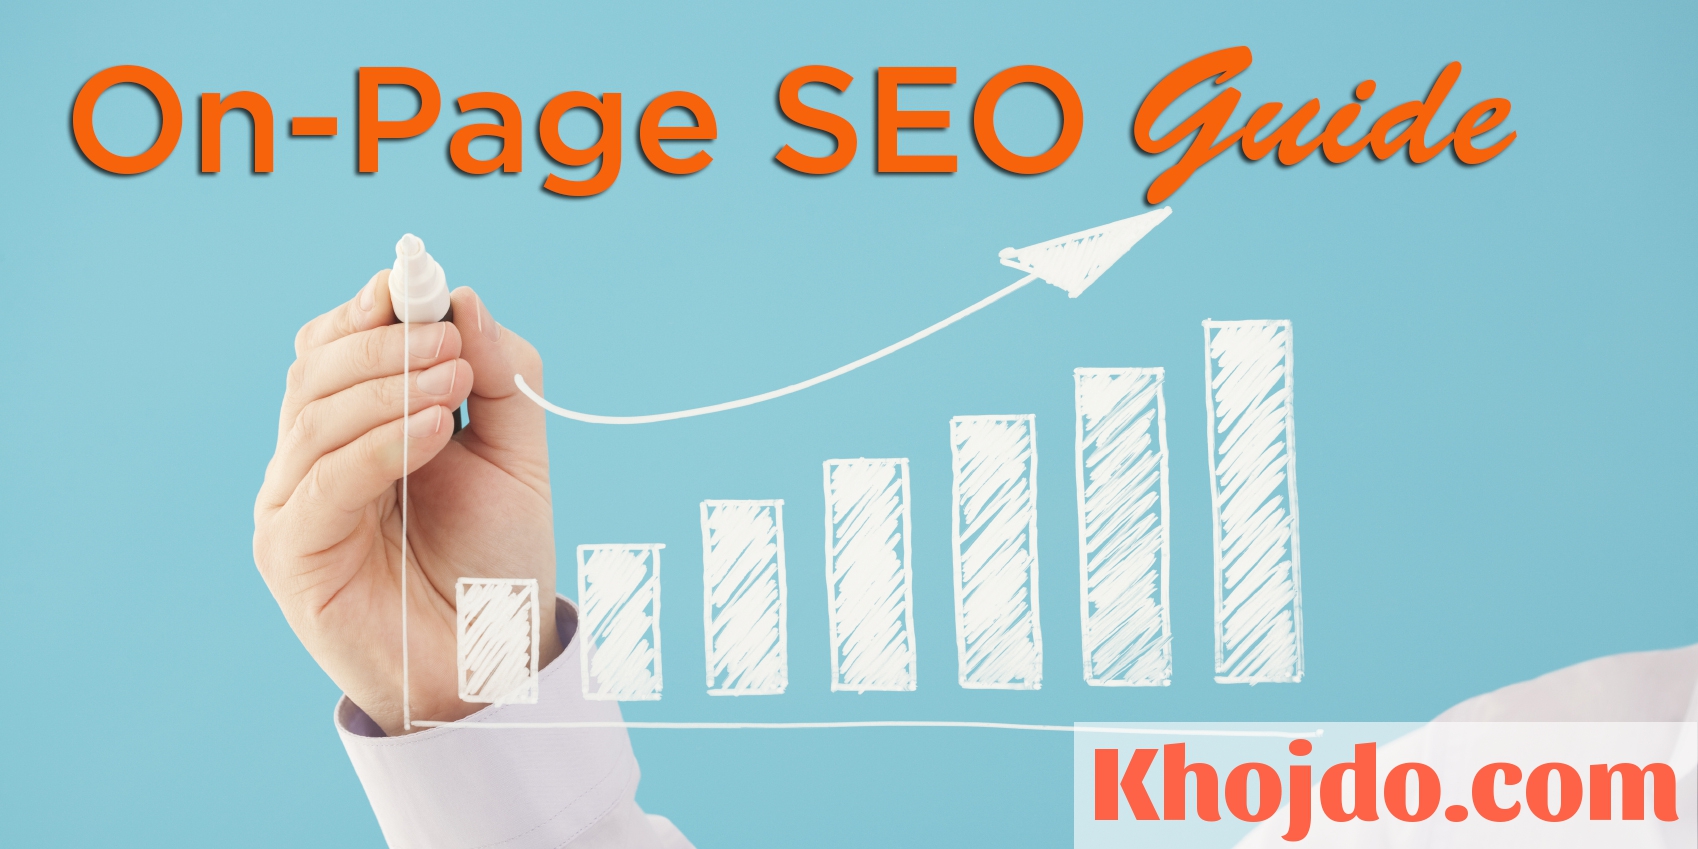 What On-Site SEO Can I Undertake to rank better in search engine